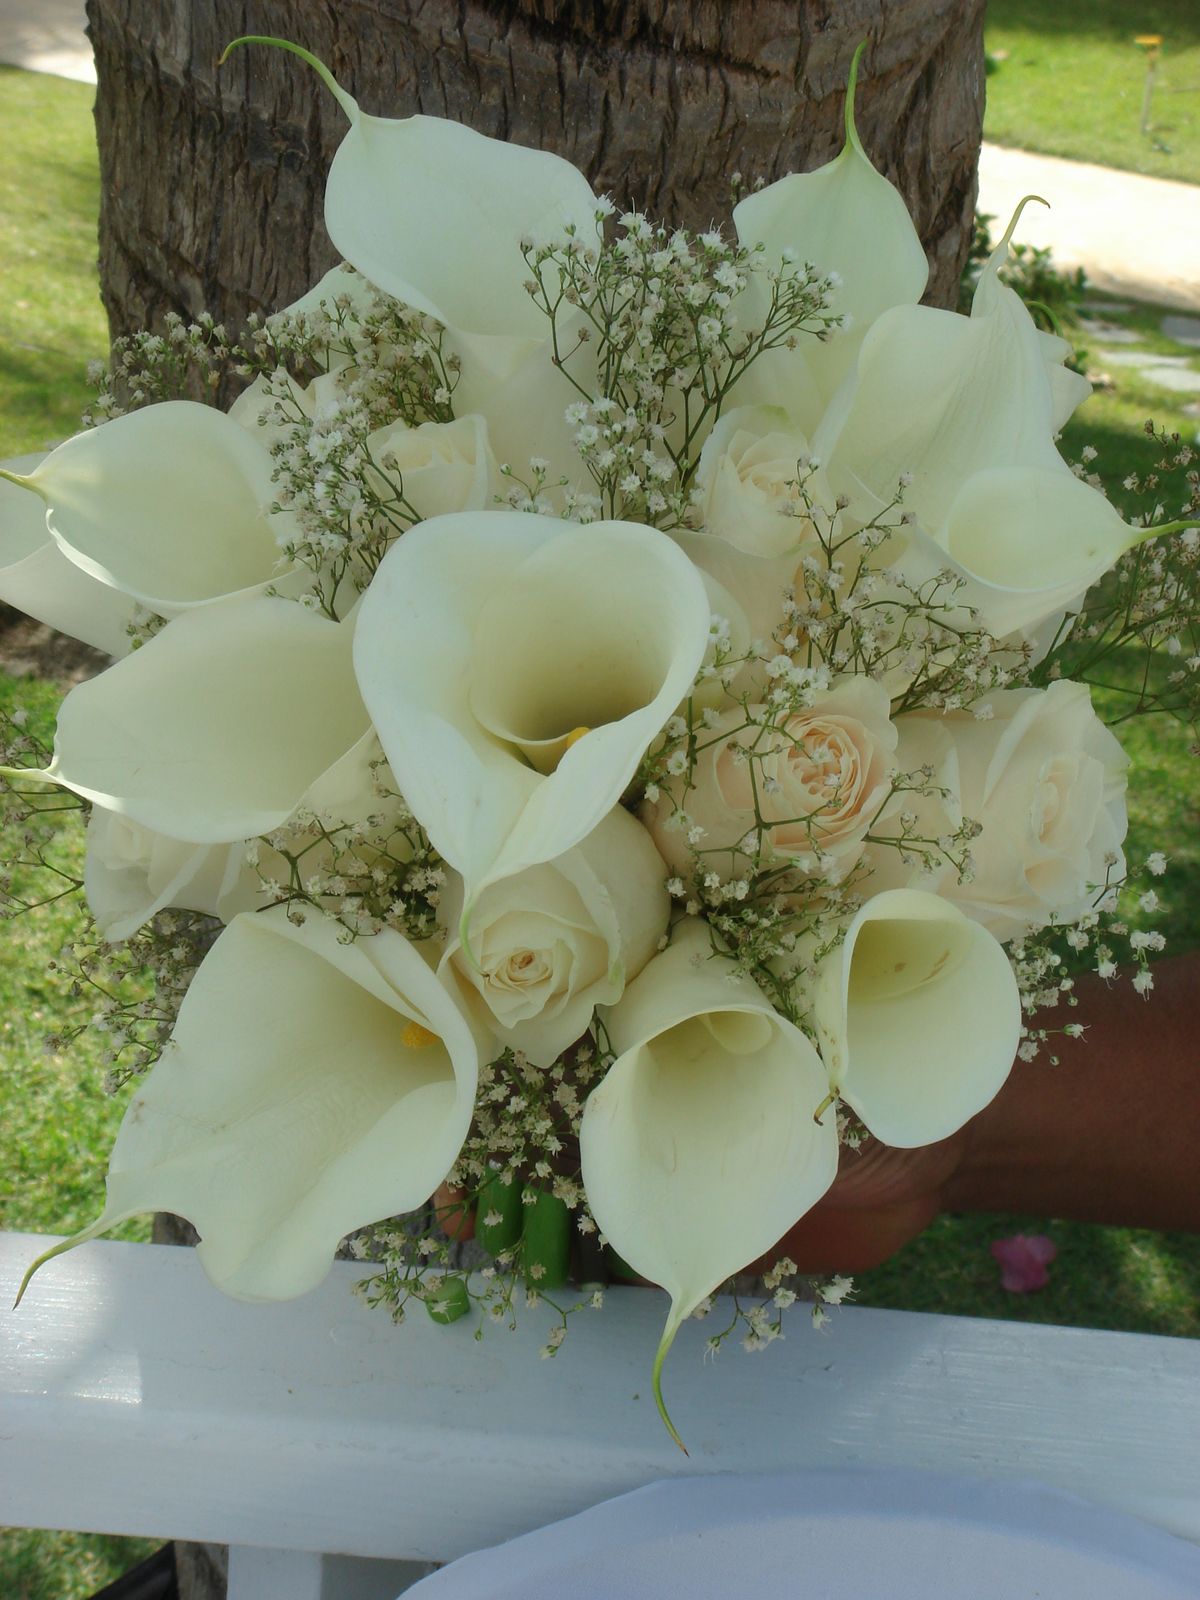 659 New bridal bouquet roses and baby's breath 157 Bouquet Bridal: White Calla Lilies, Roses and Baby's Breath Bouquet 